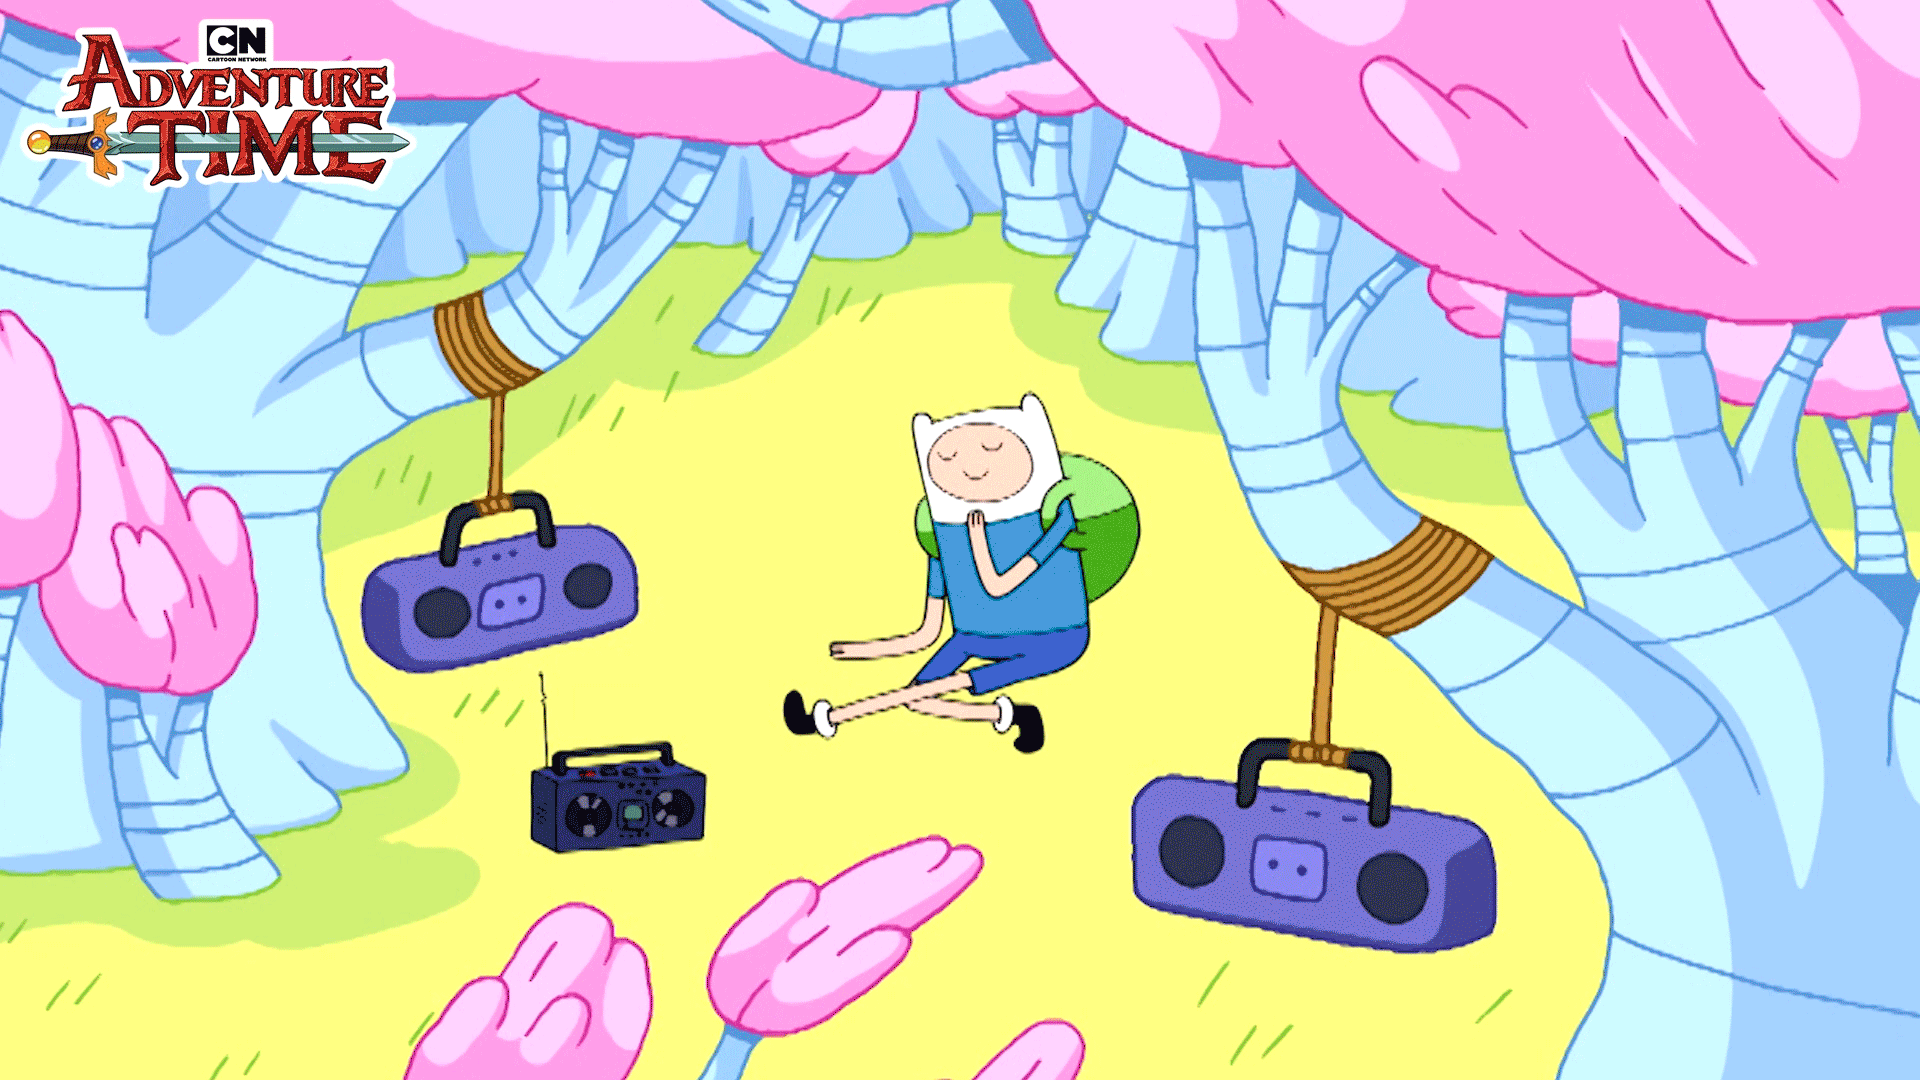 Adventure time gifs